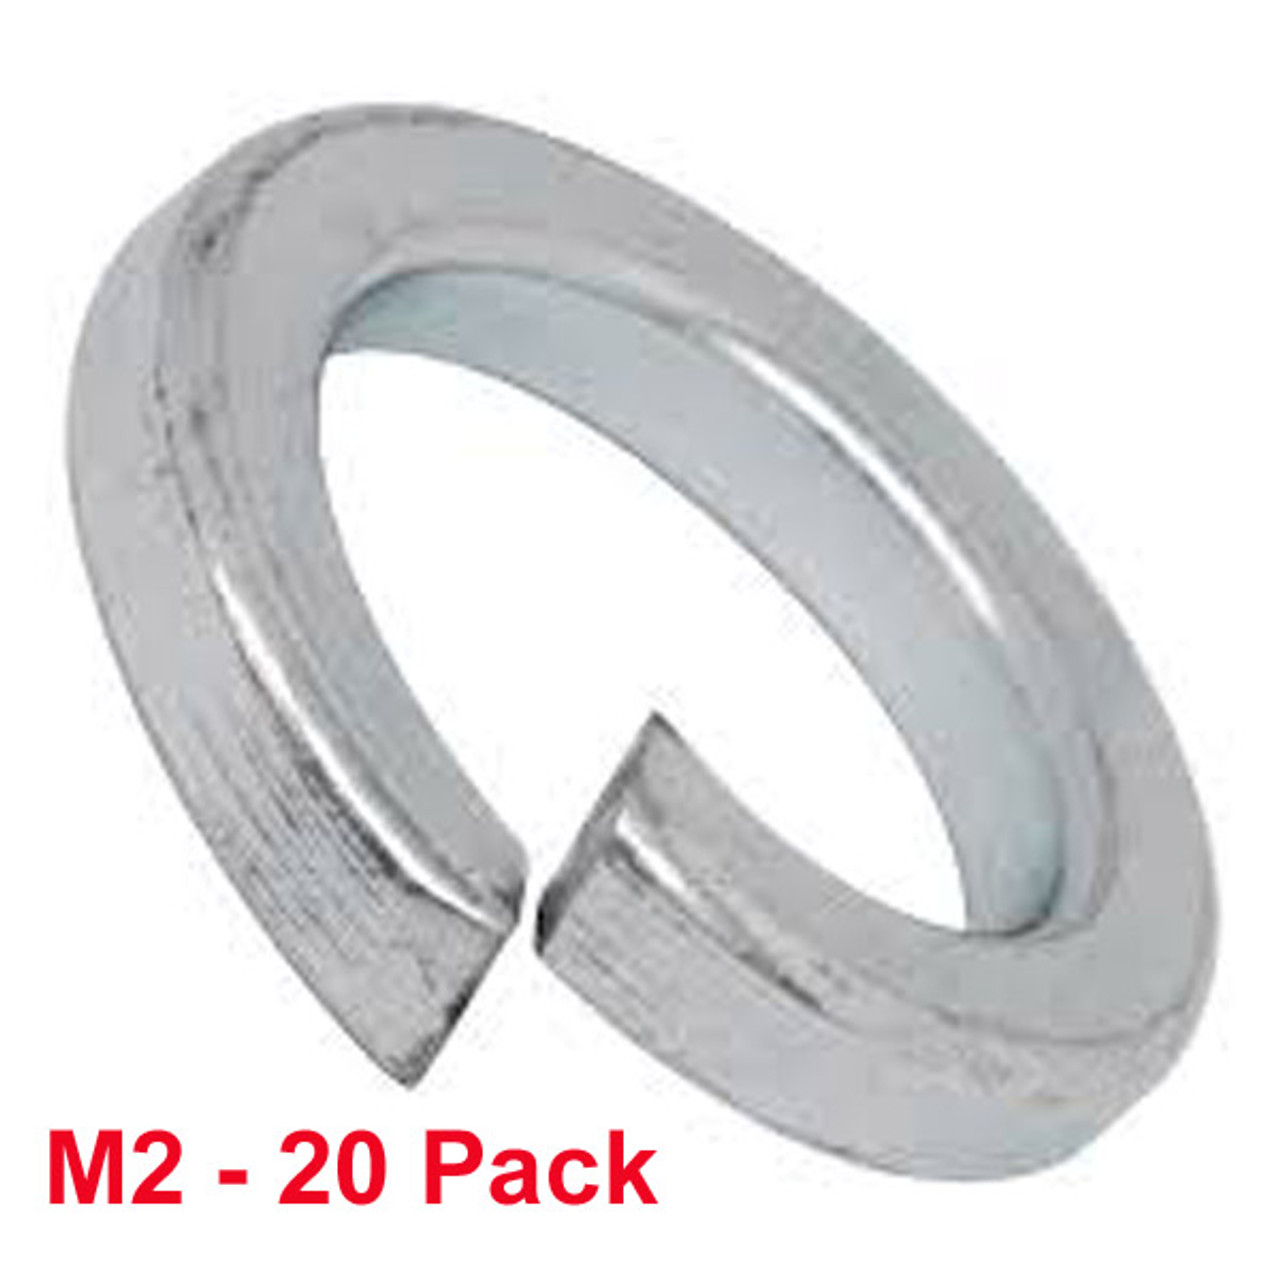 M2 Spring Washers - 20 pack - Stainless - (#WSS-220)